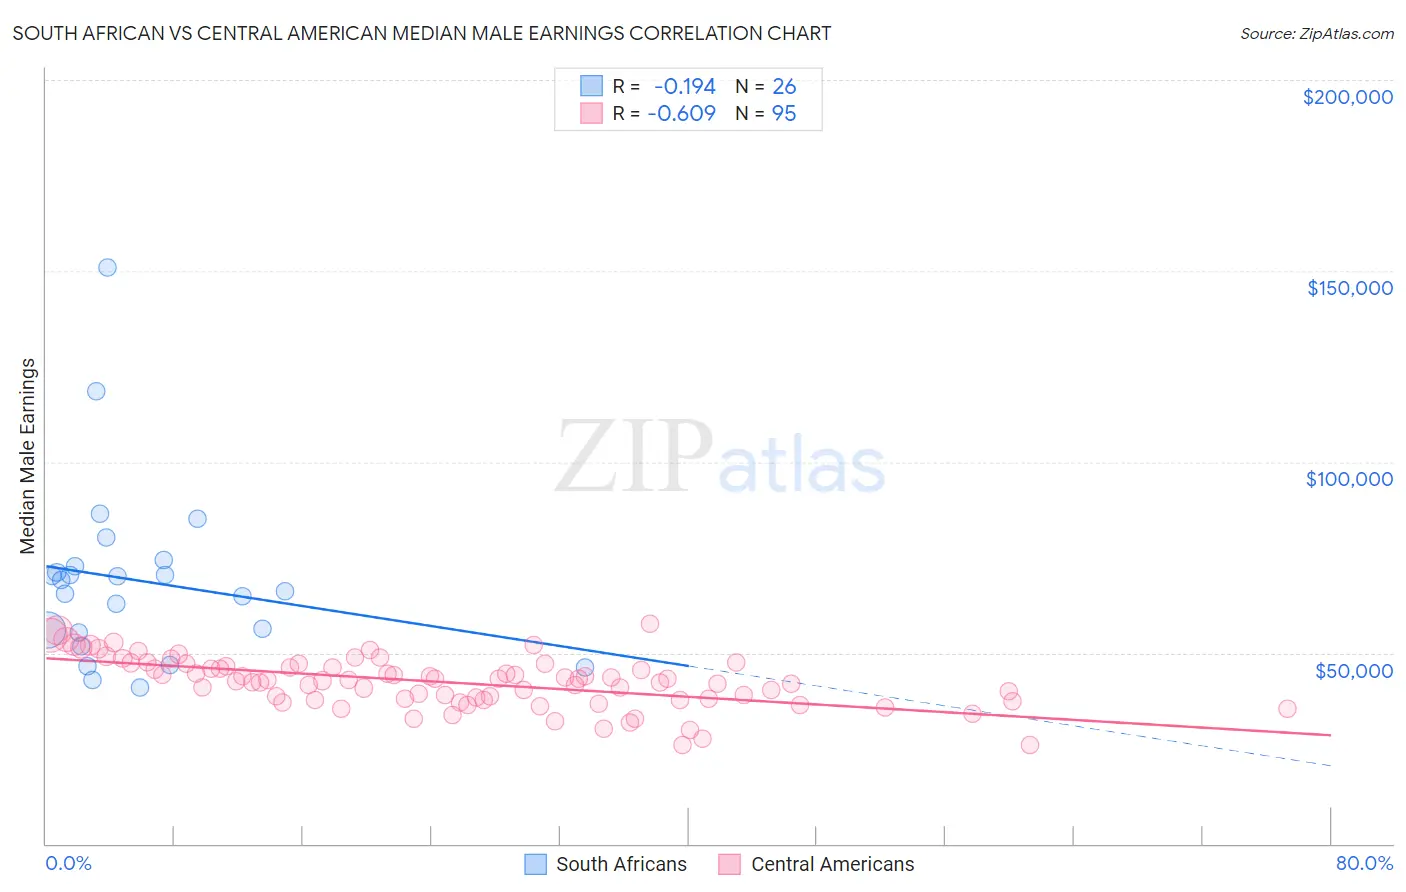 South African vs Central American Median Male Earnings